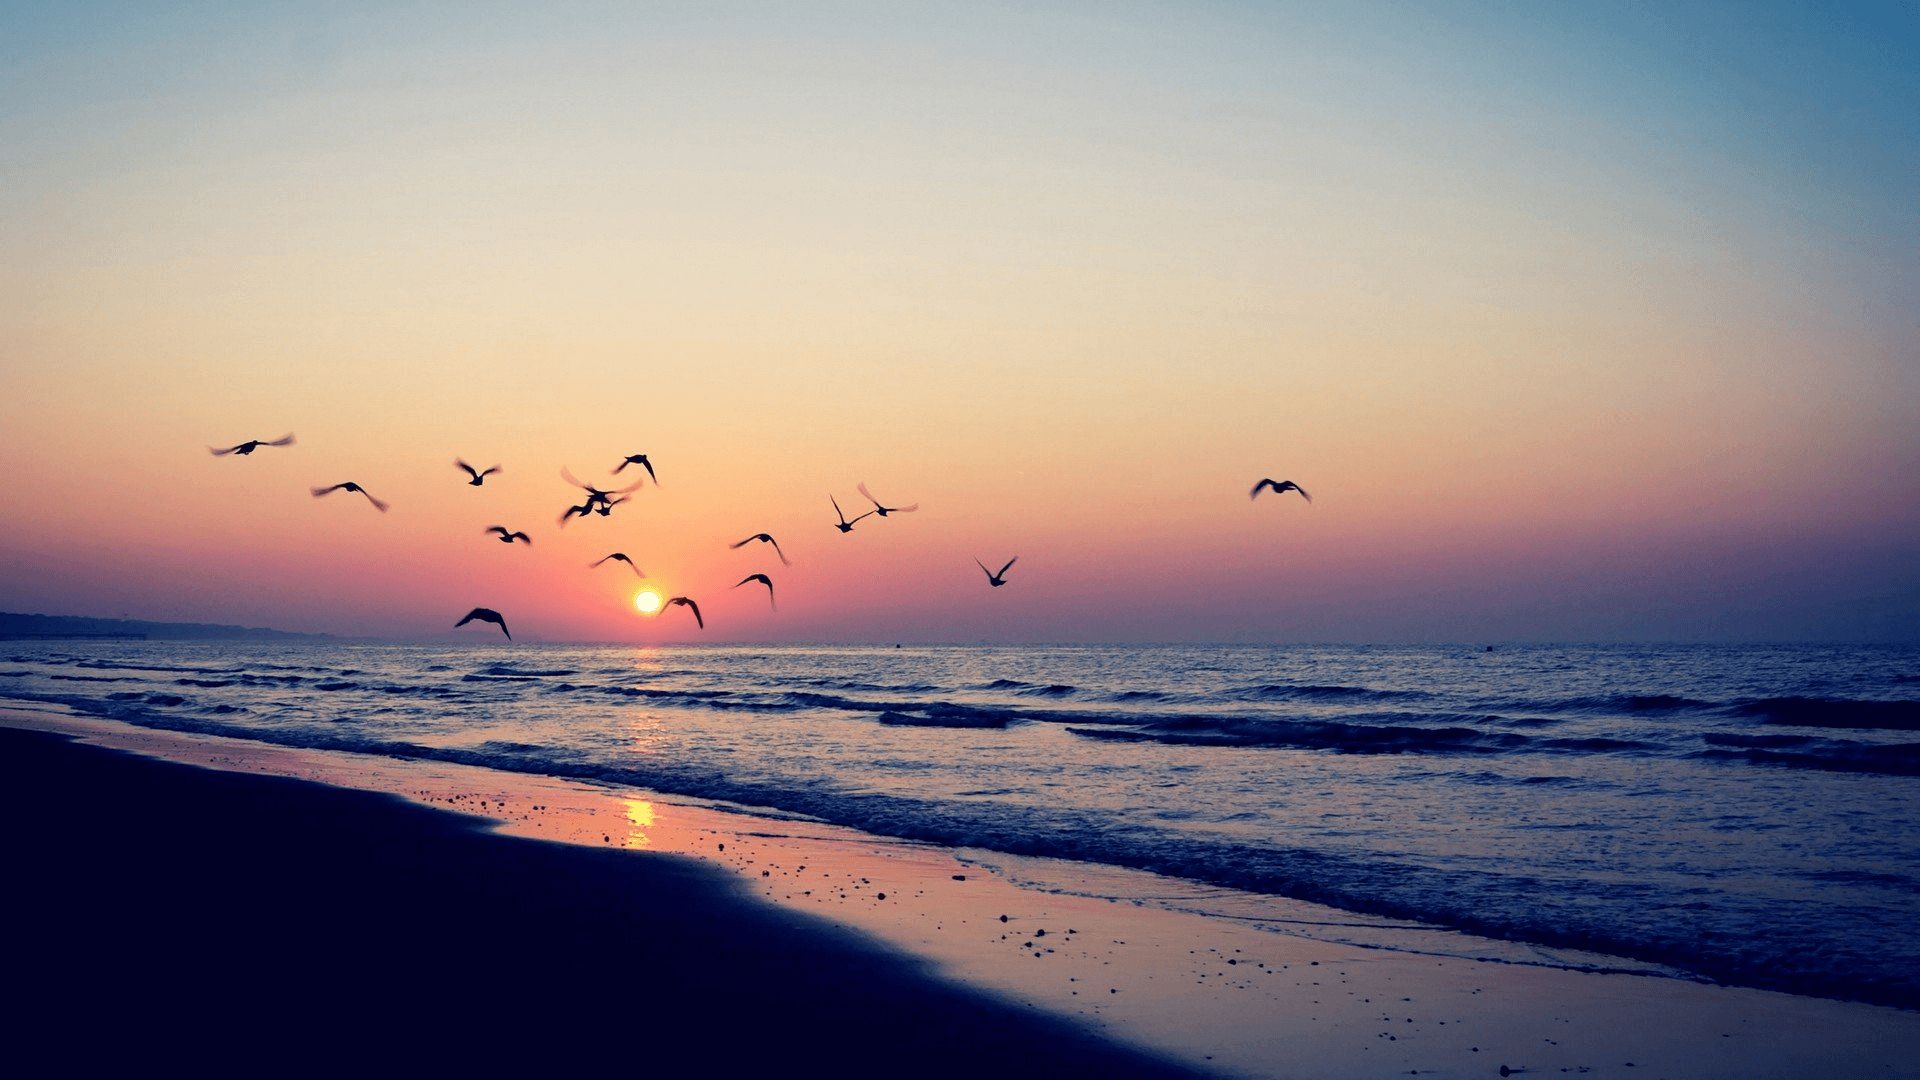 A flock of birds flying over the ocean during a sunset. - Summer